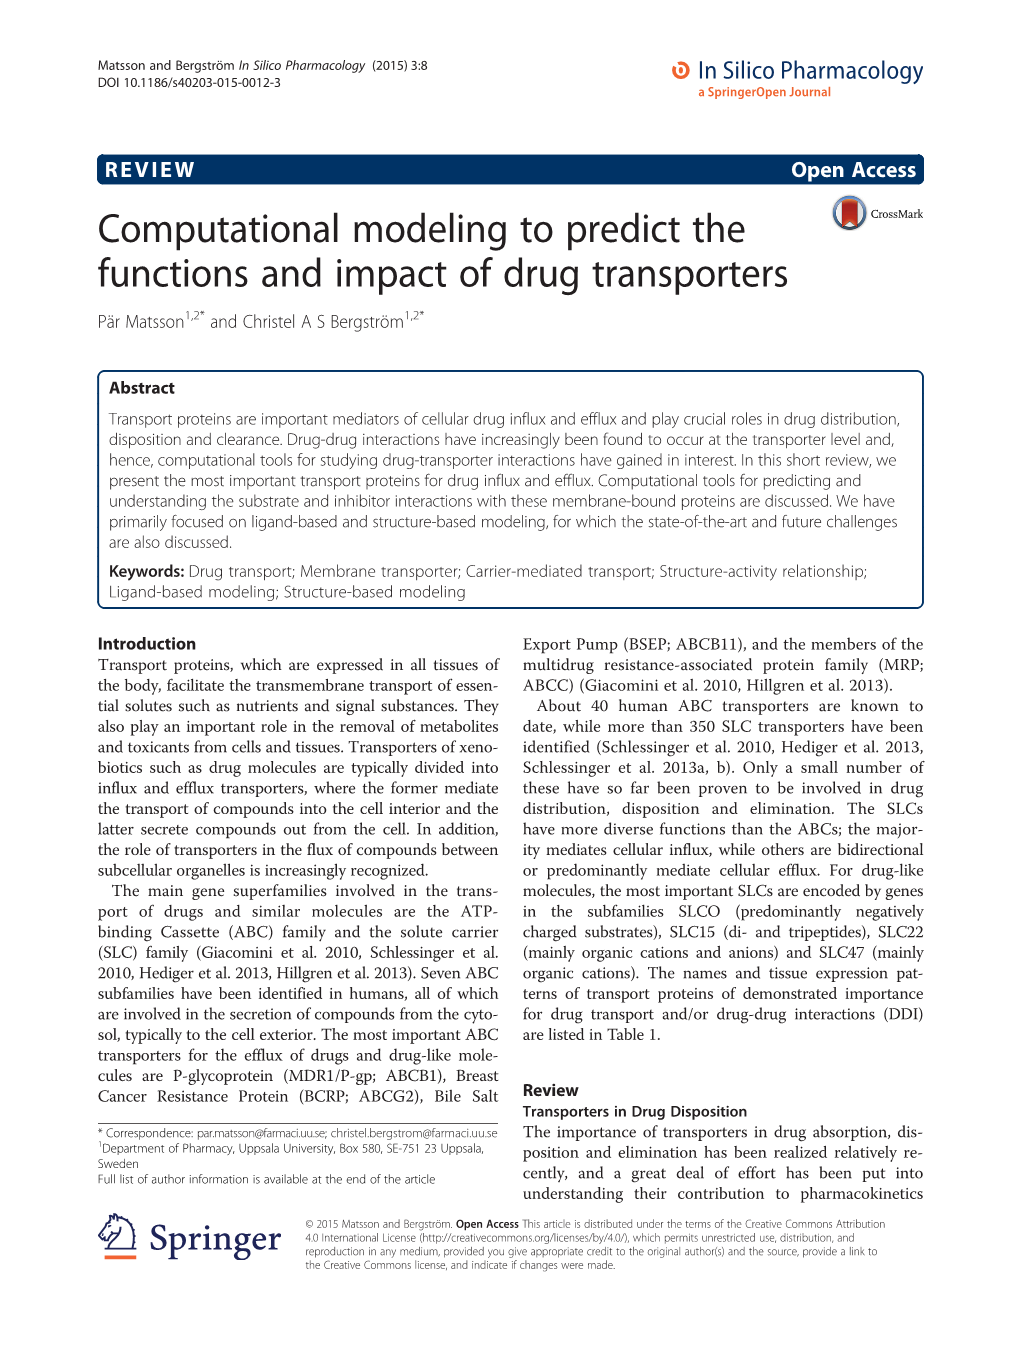 Computational Modeling to Predict the Functions and Impact of Drug Transporters Pär Matsson1,2* and Christel a S Bergström1,2*